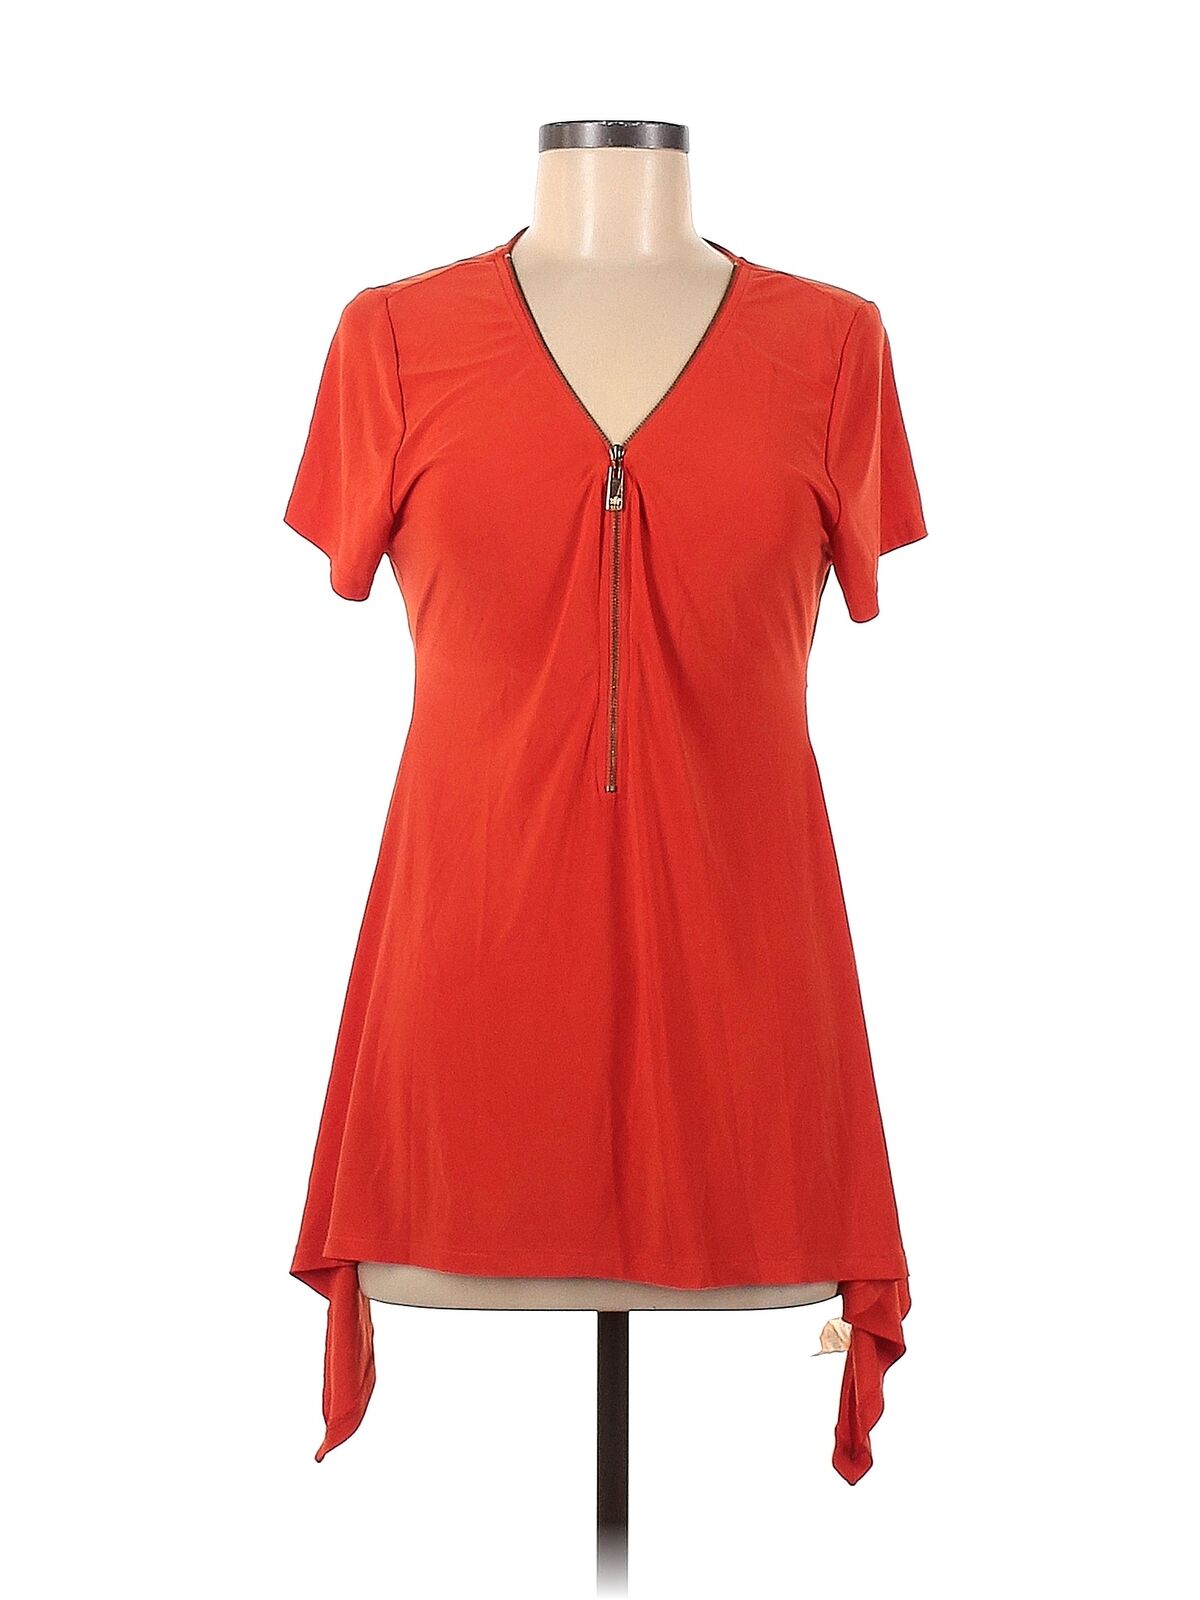 Chaus Women Red Short Sleeve Top M - image 1